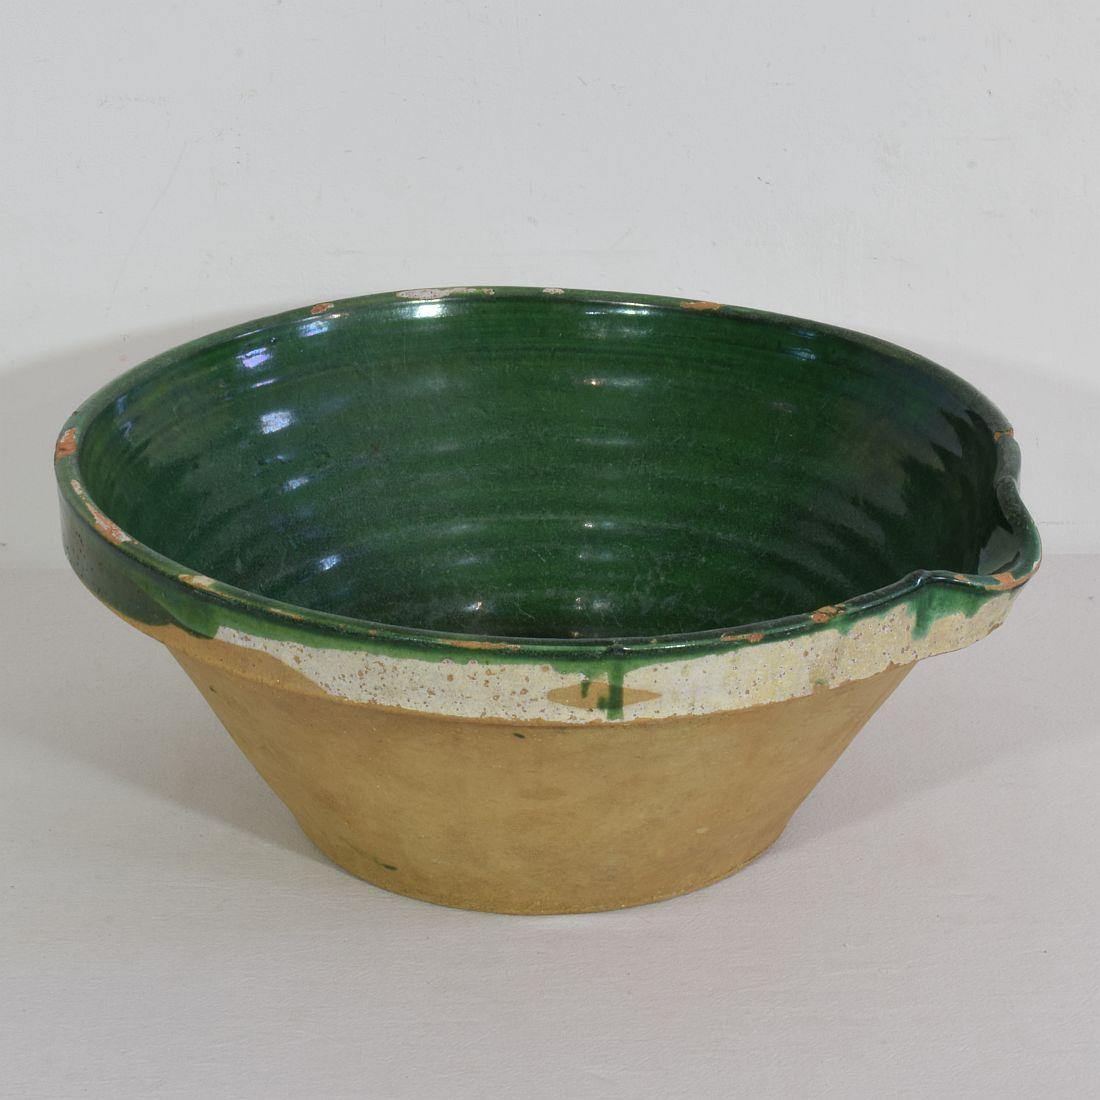 French Provincial 19th Century French Green Glazed Terracotta Dairy Bowl or Tian For Sale